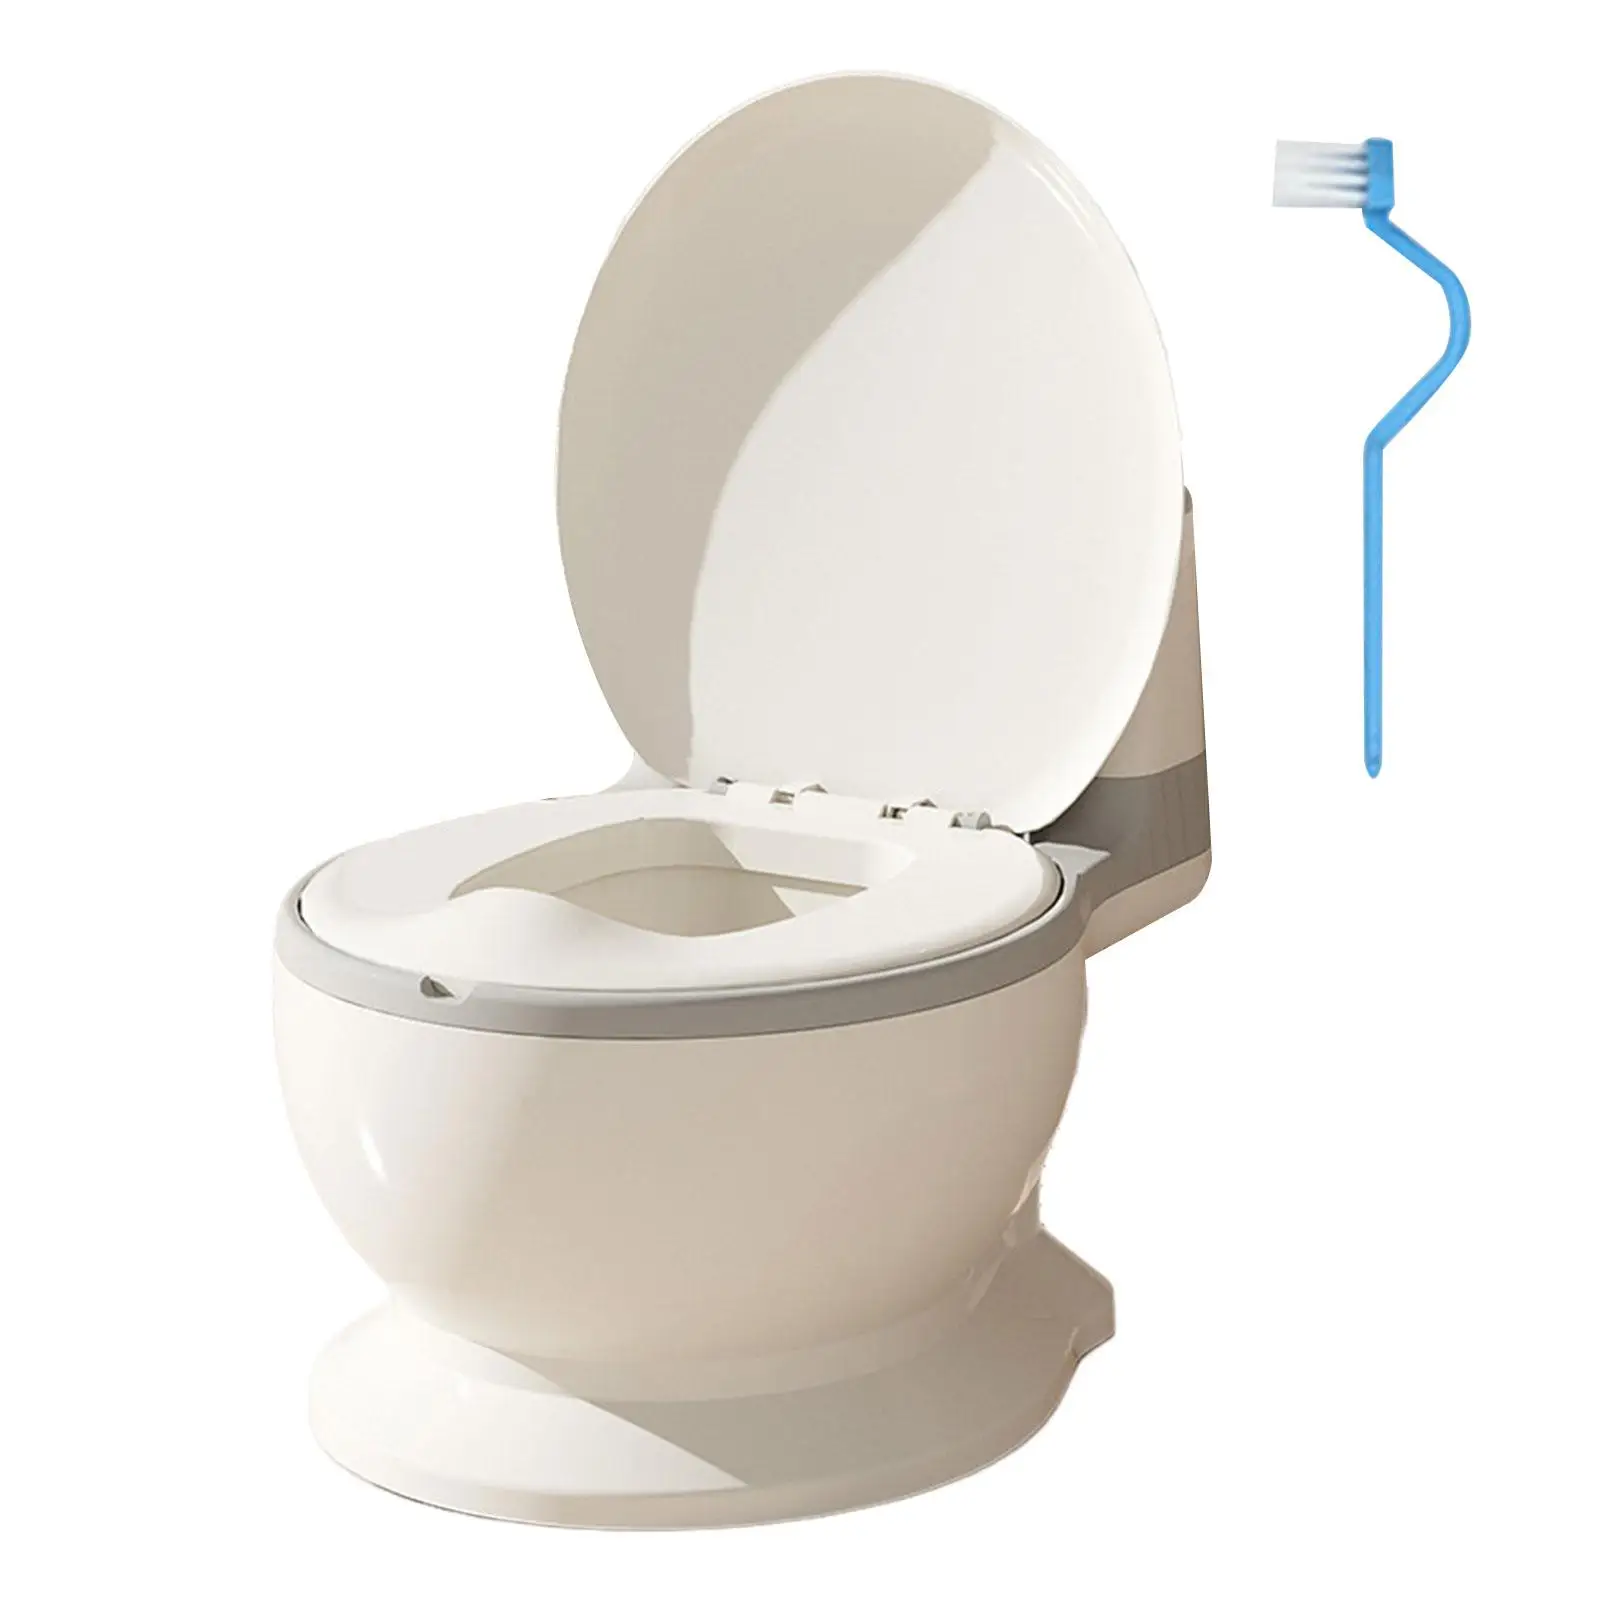 Toilet Training Potty with Spilling Guard Easy to Clean Realistic Toilet Removable Potty Pot for Bedroom Girls Boys Ages 0-7